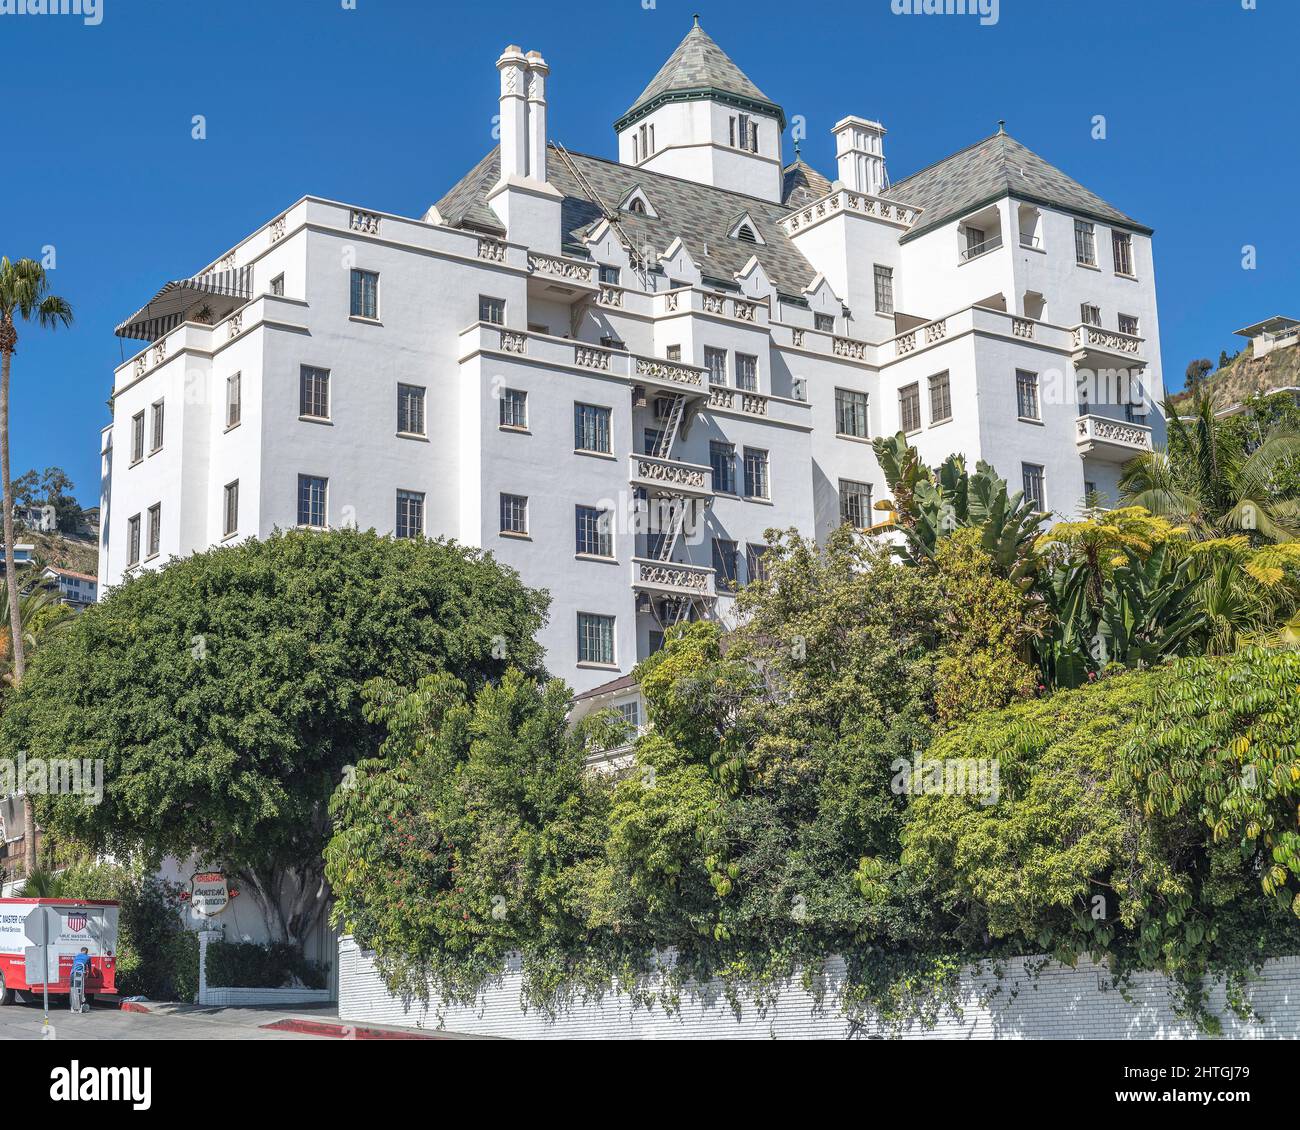 Los Angeles, CA, USA - February 28, 2022: Exterior of the historic Chateau Marmont hotel on Sunset Boulevard in Los Angeles, CA. Stock Photo